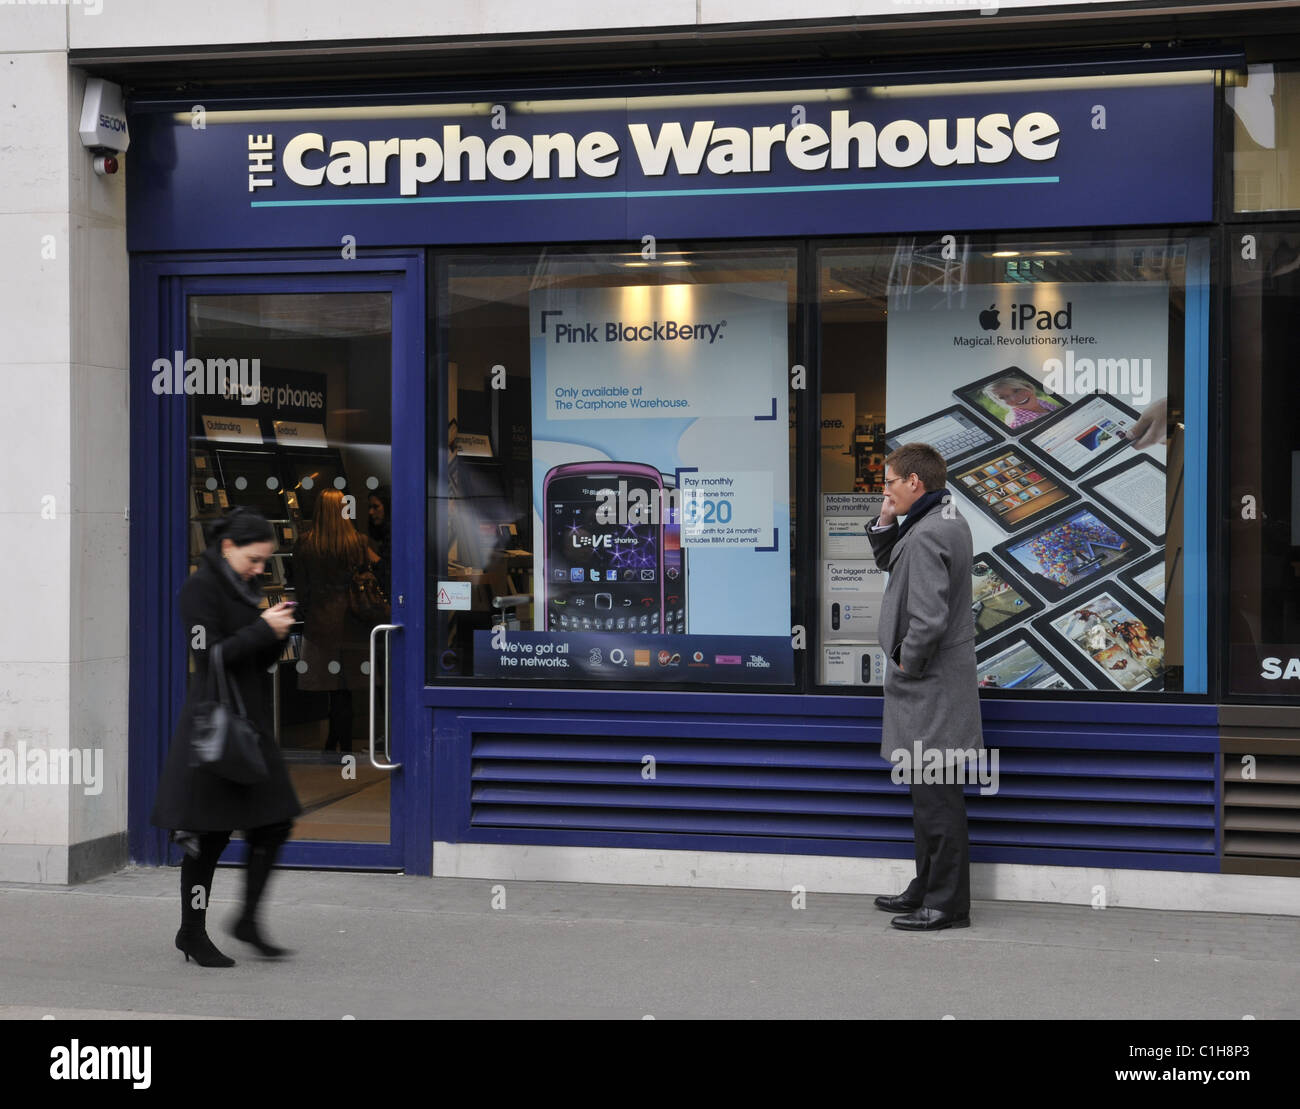 A general view of a The Carphone Warehouse with members of the public speaking on mobile phones Stock Photo